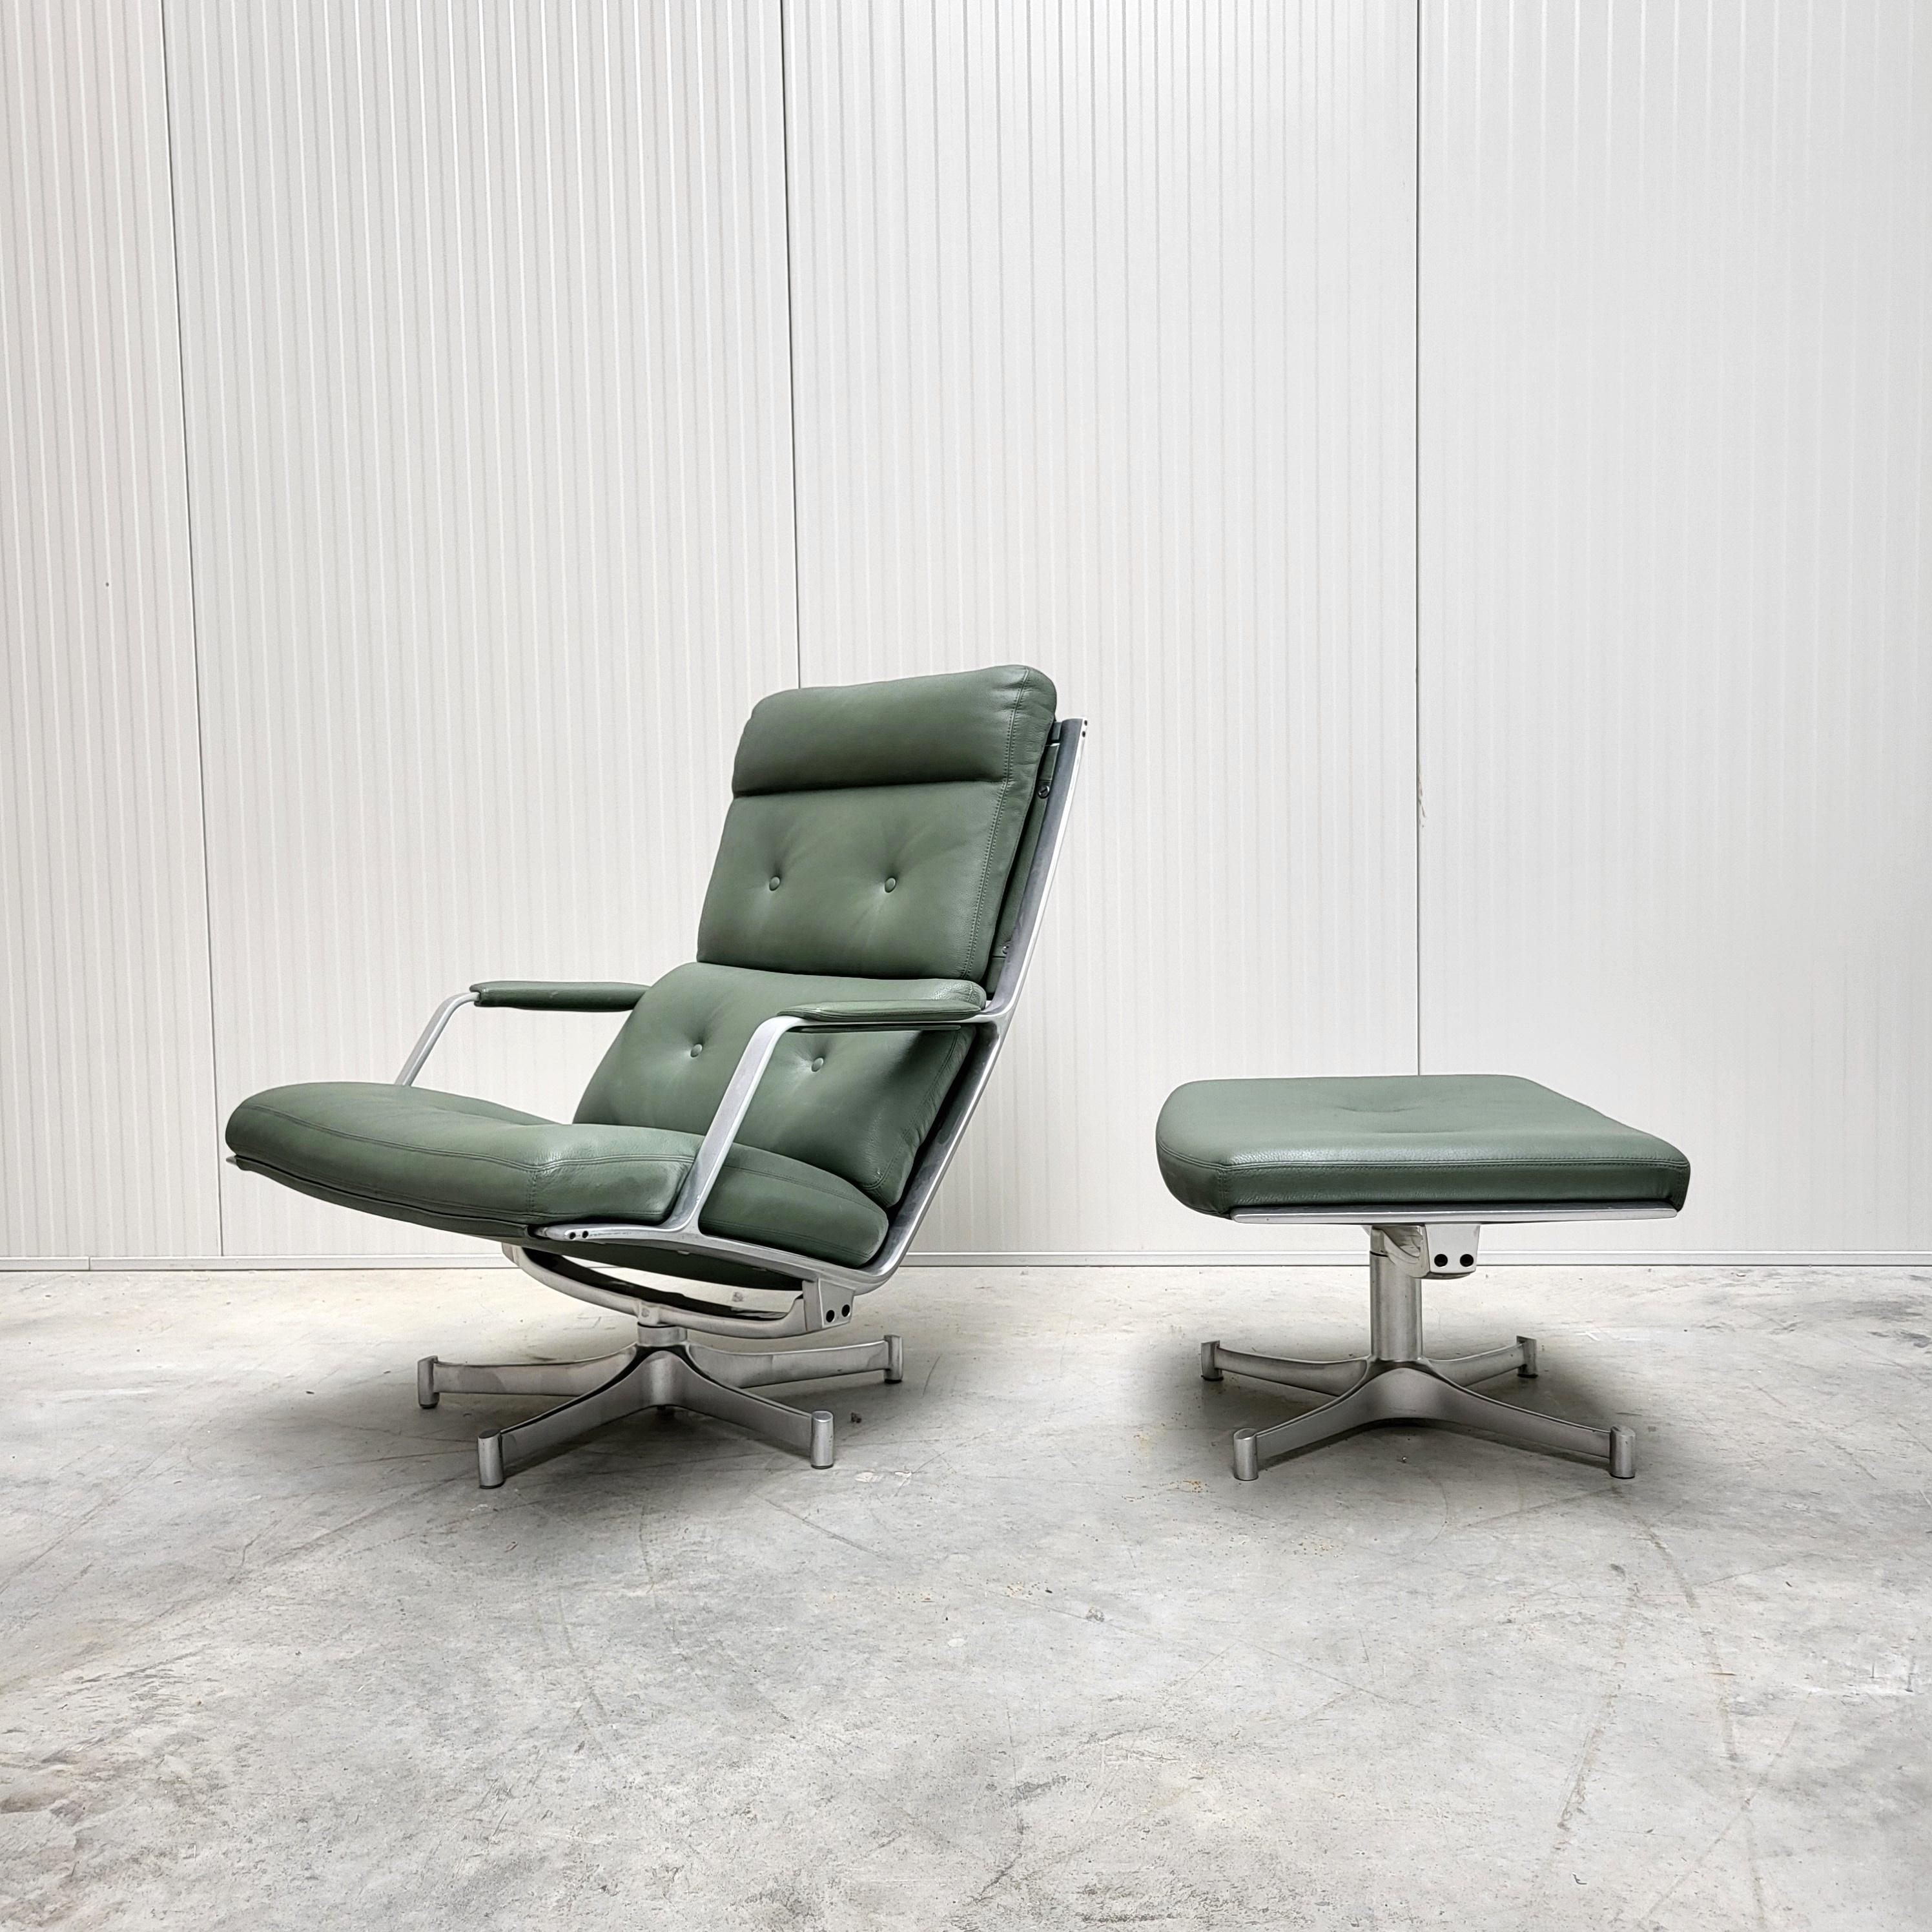 This fine example of the FK85 lounge chair with ottoman was designed by Jorgen Kastholm & Preben Fabricius in the early 60s and produced by Kill International in the late 1960s. 

This edition is a very early edition from the first production